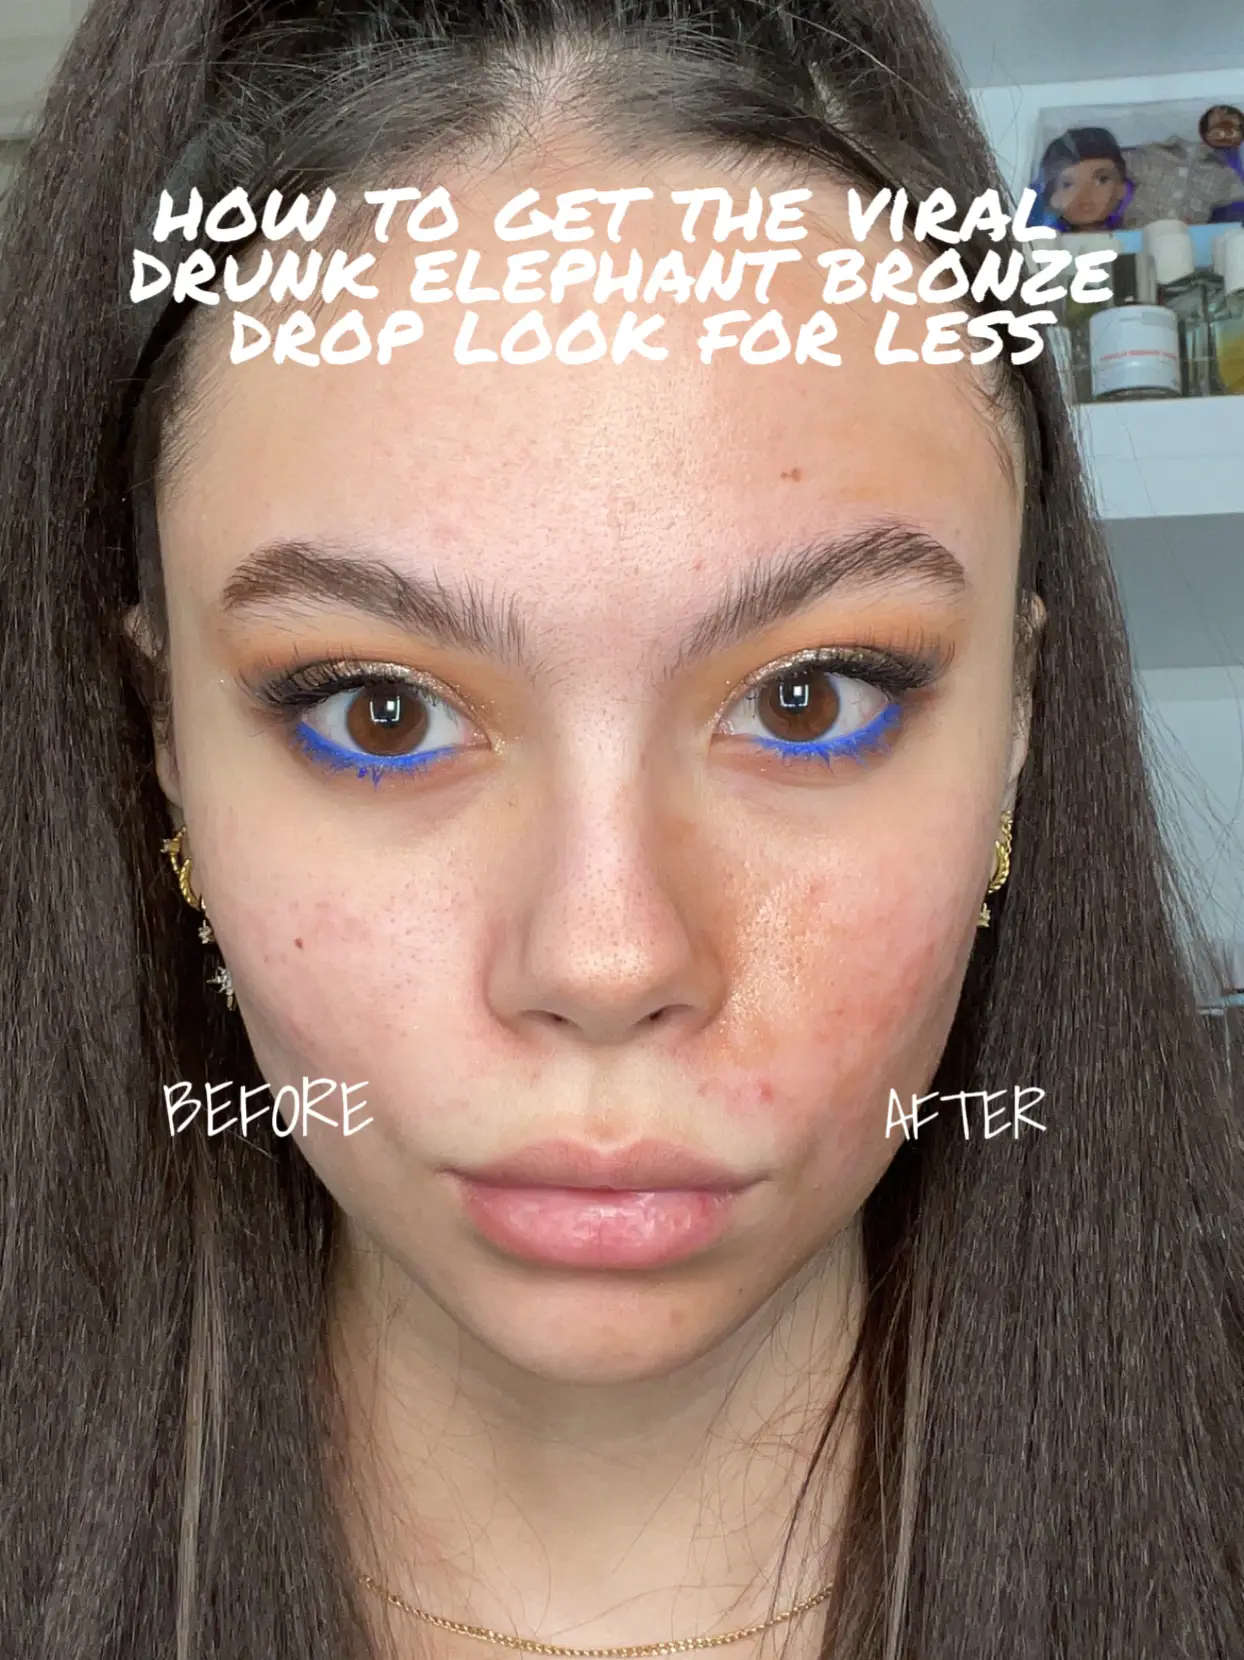 Drunk Elephant Bronze Drops Look for LESS, Gallery posted by  yungbrtznixxii